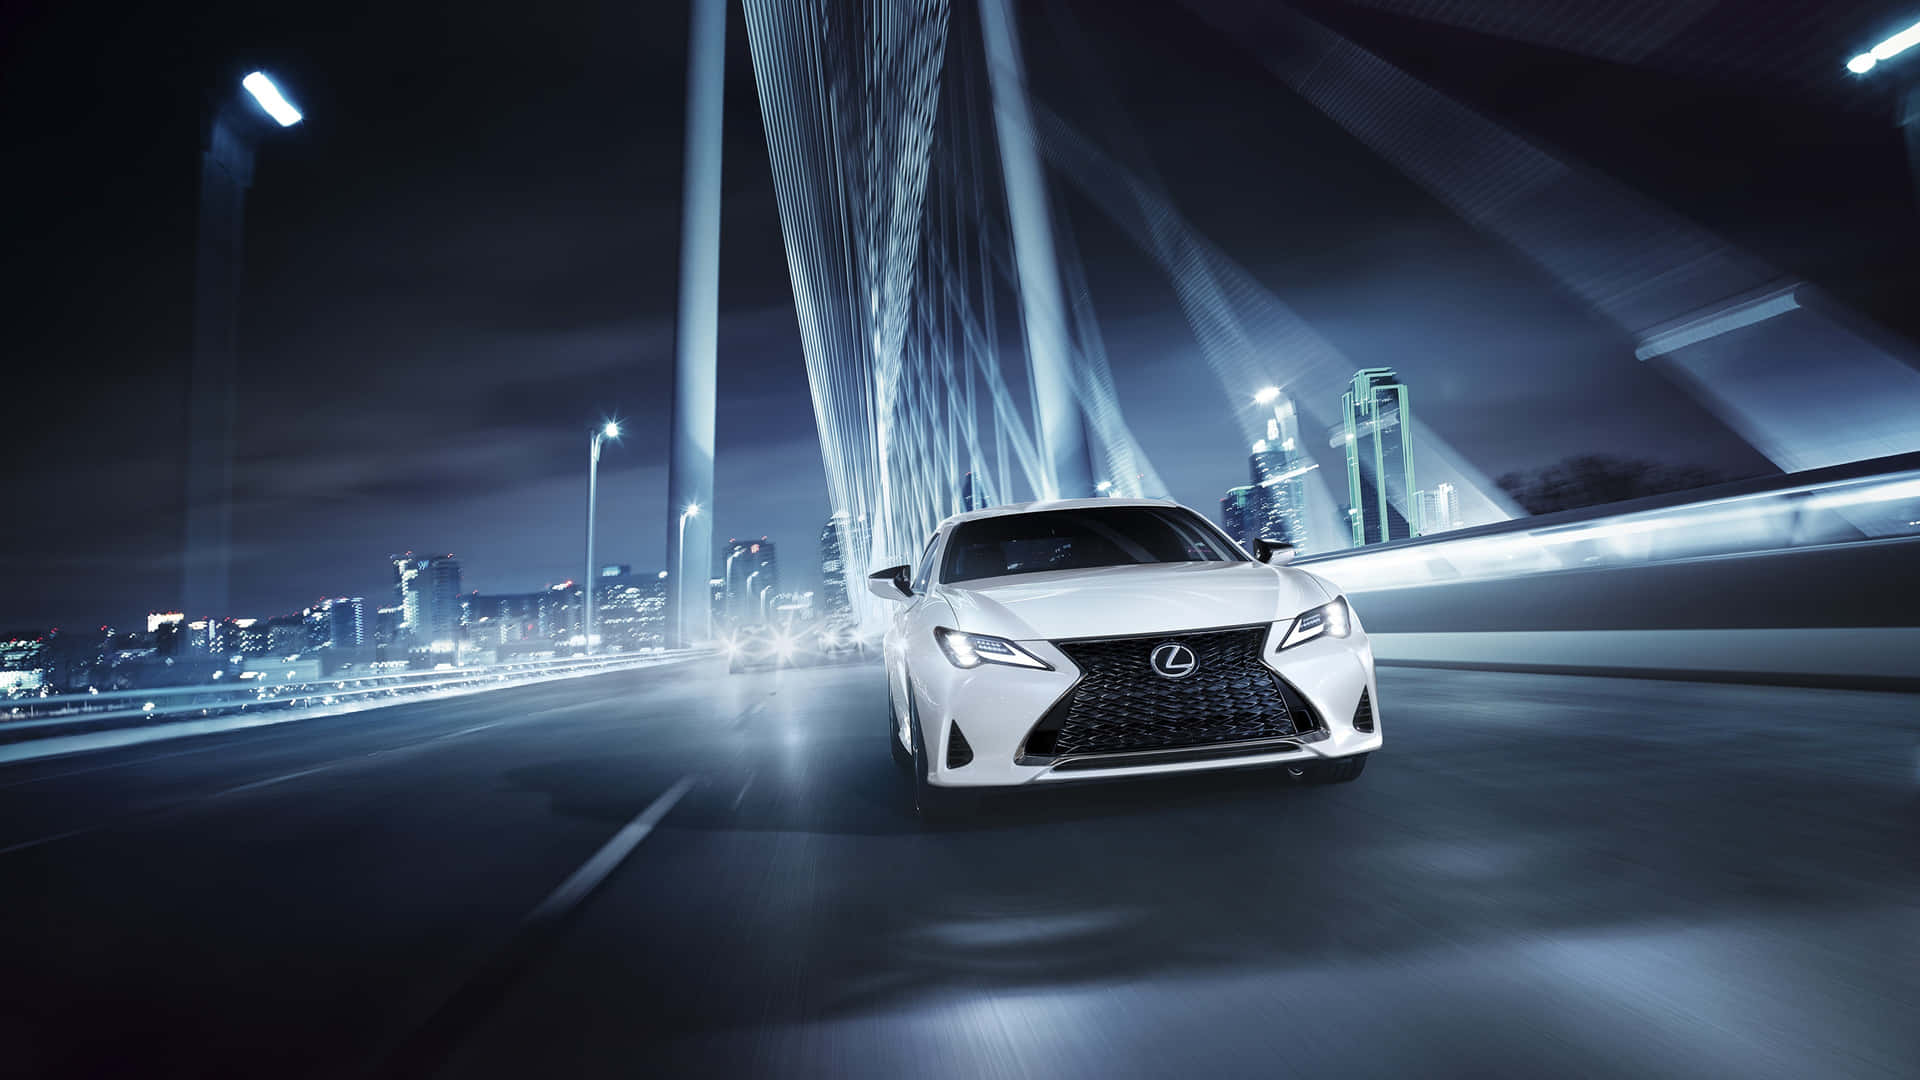 The White Lexus Cx Is Driving On A Bridge At Night Background